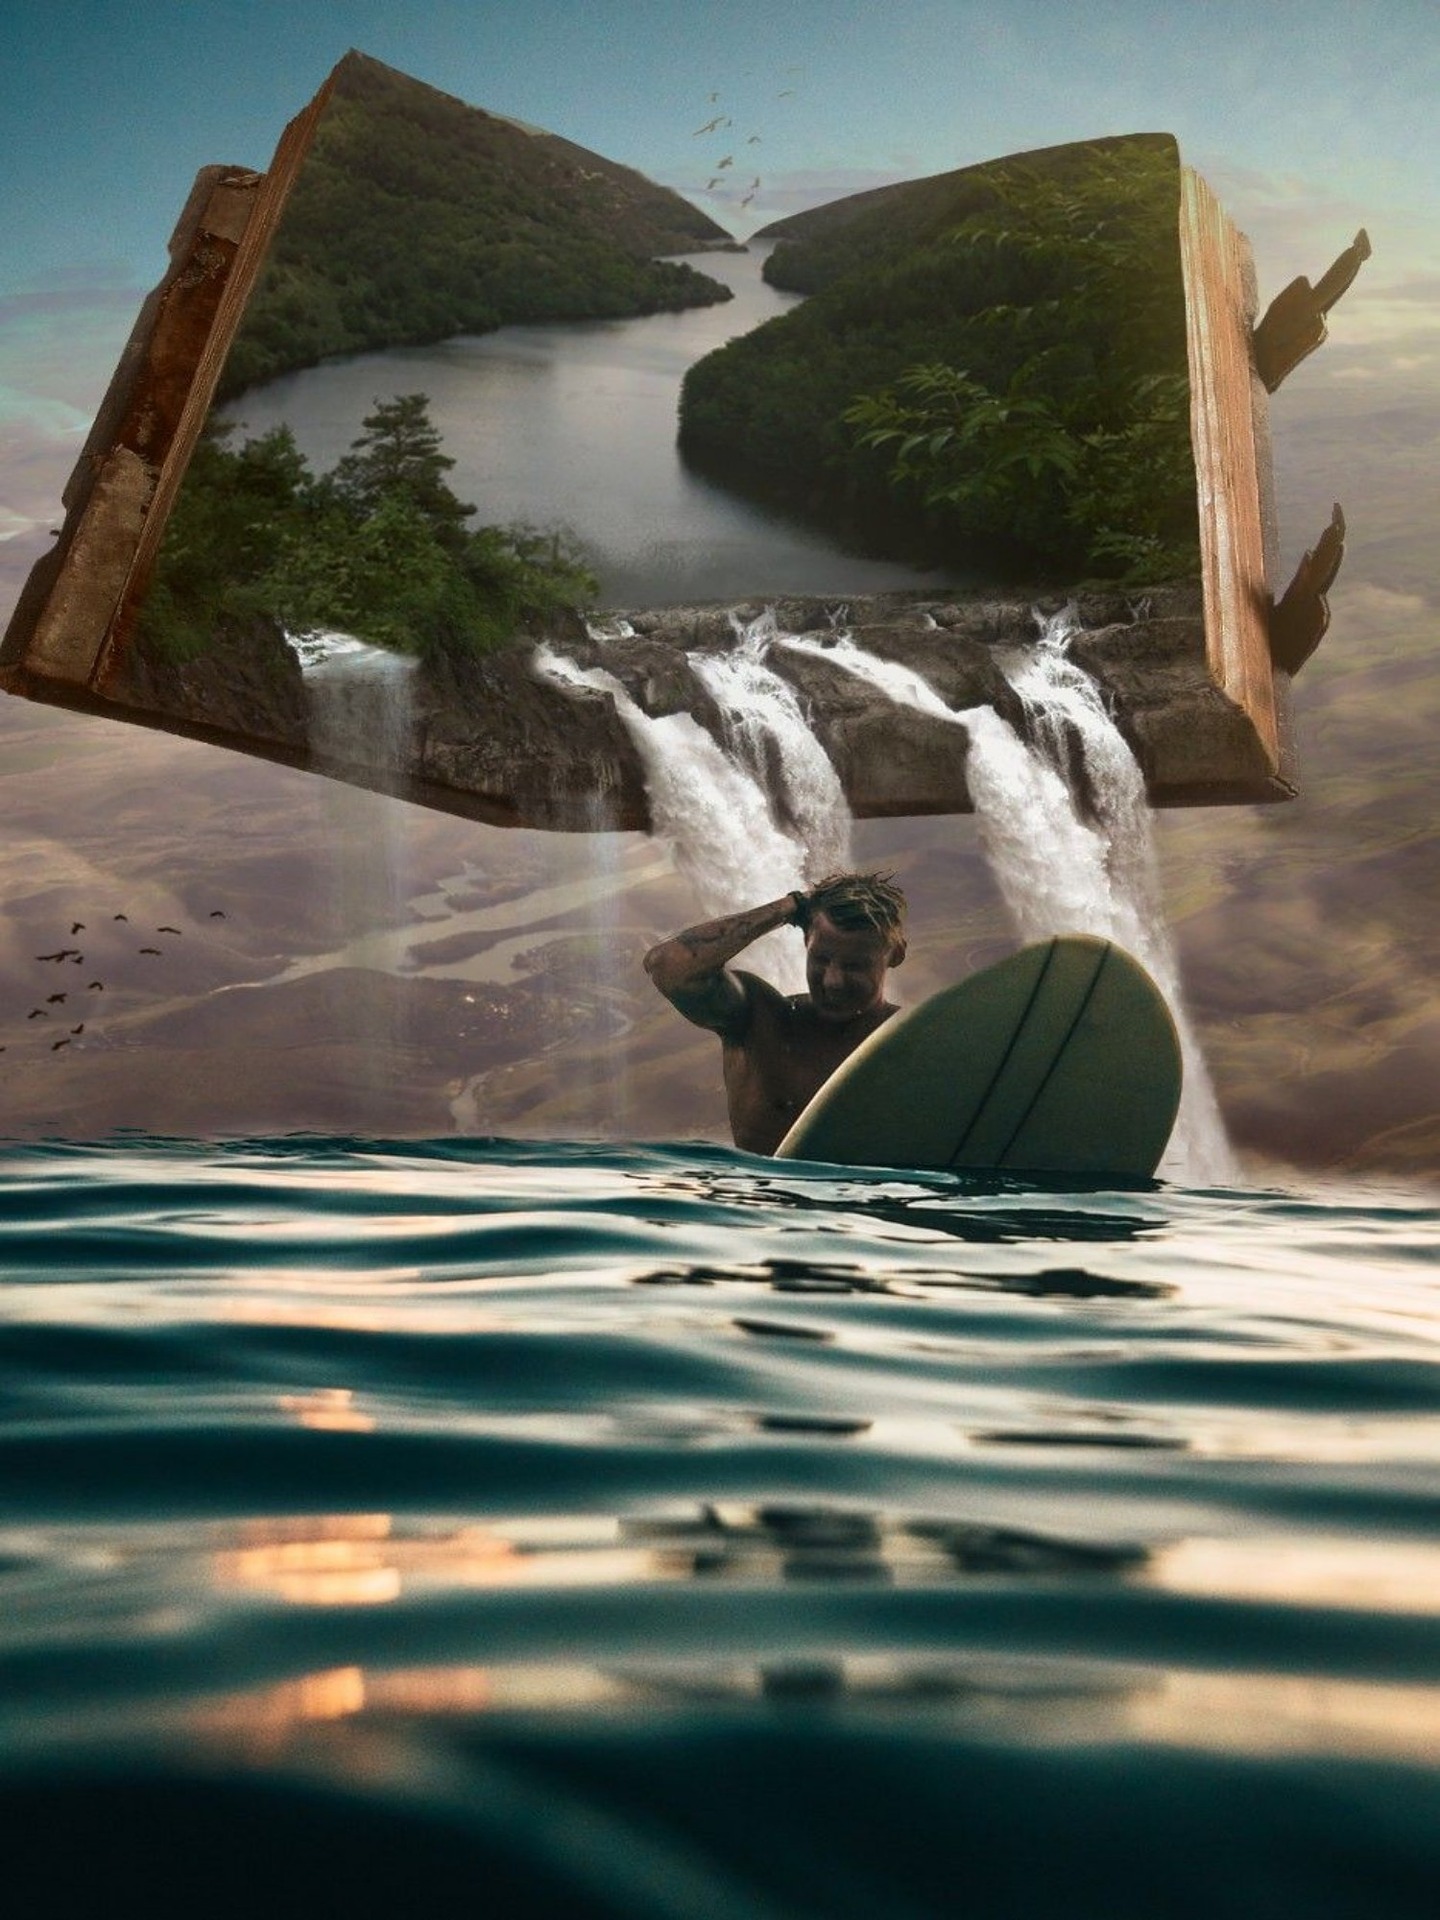 A fantasy image of a male surfer relaxing in the sea. Abobe him in the sky is a book of nature, a lush river in a tropical forest, from which flow streams of water, into the sea behind him.